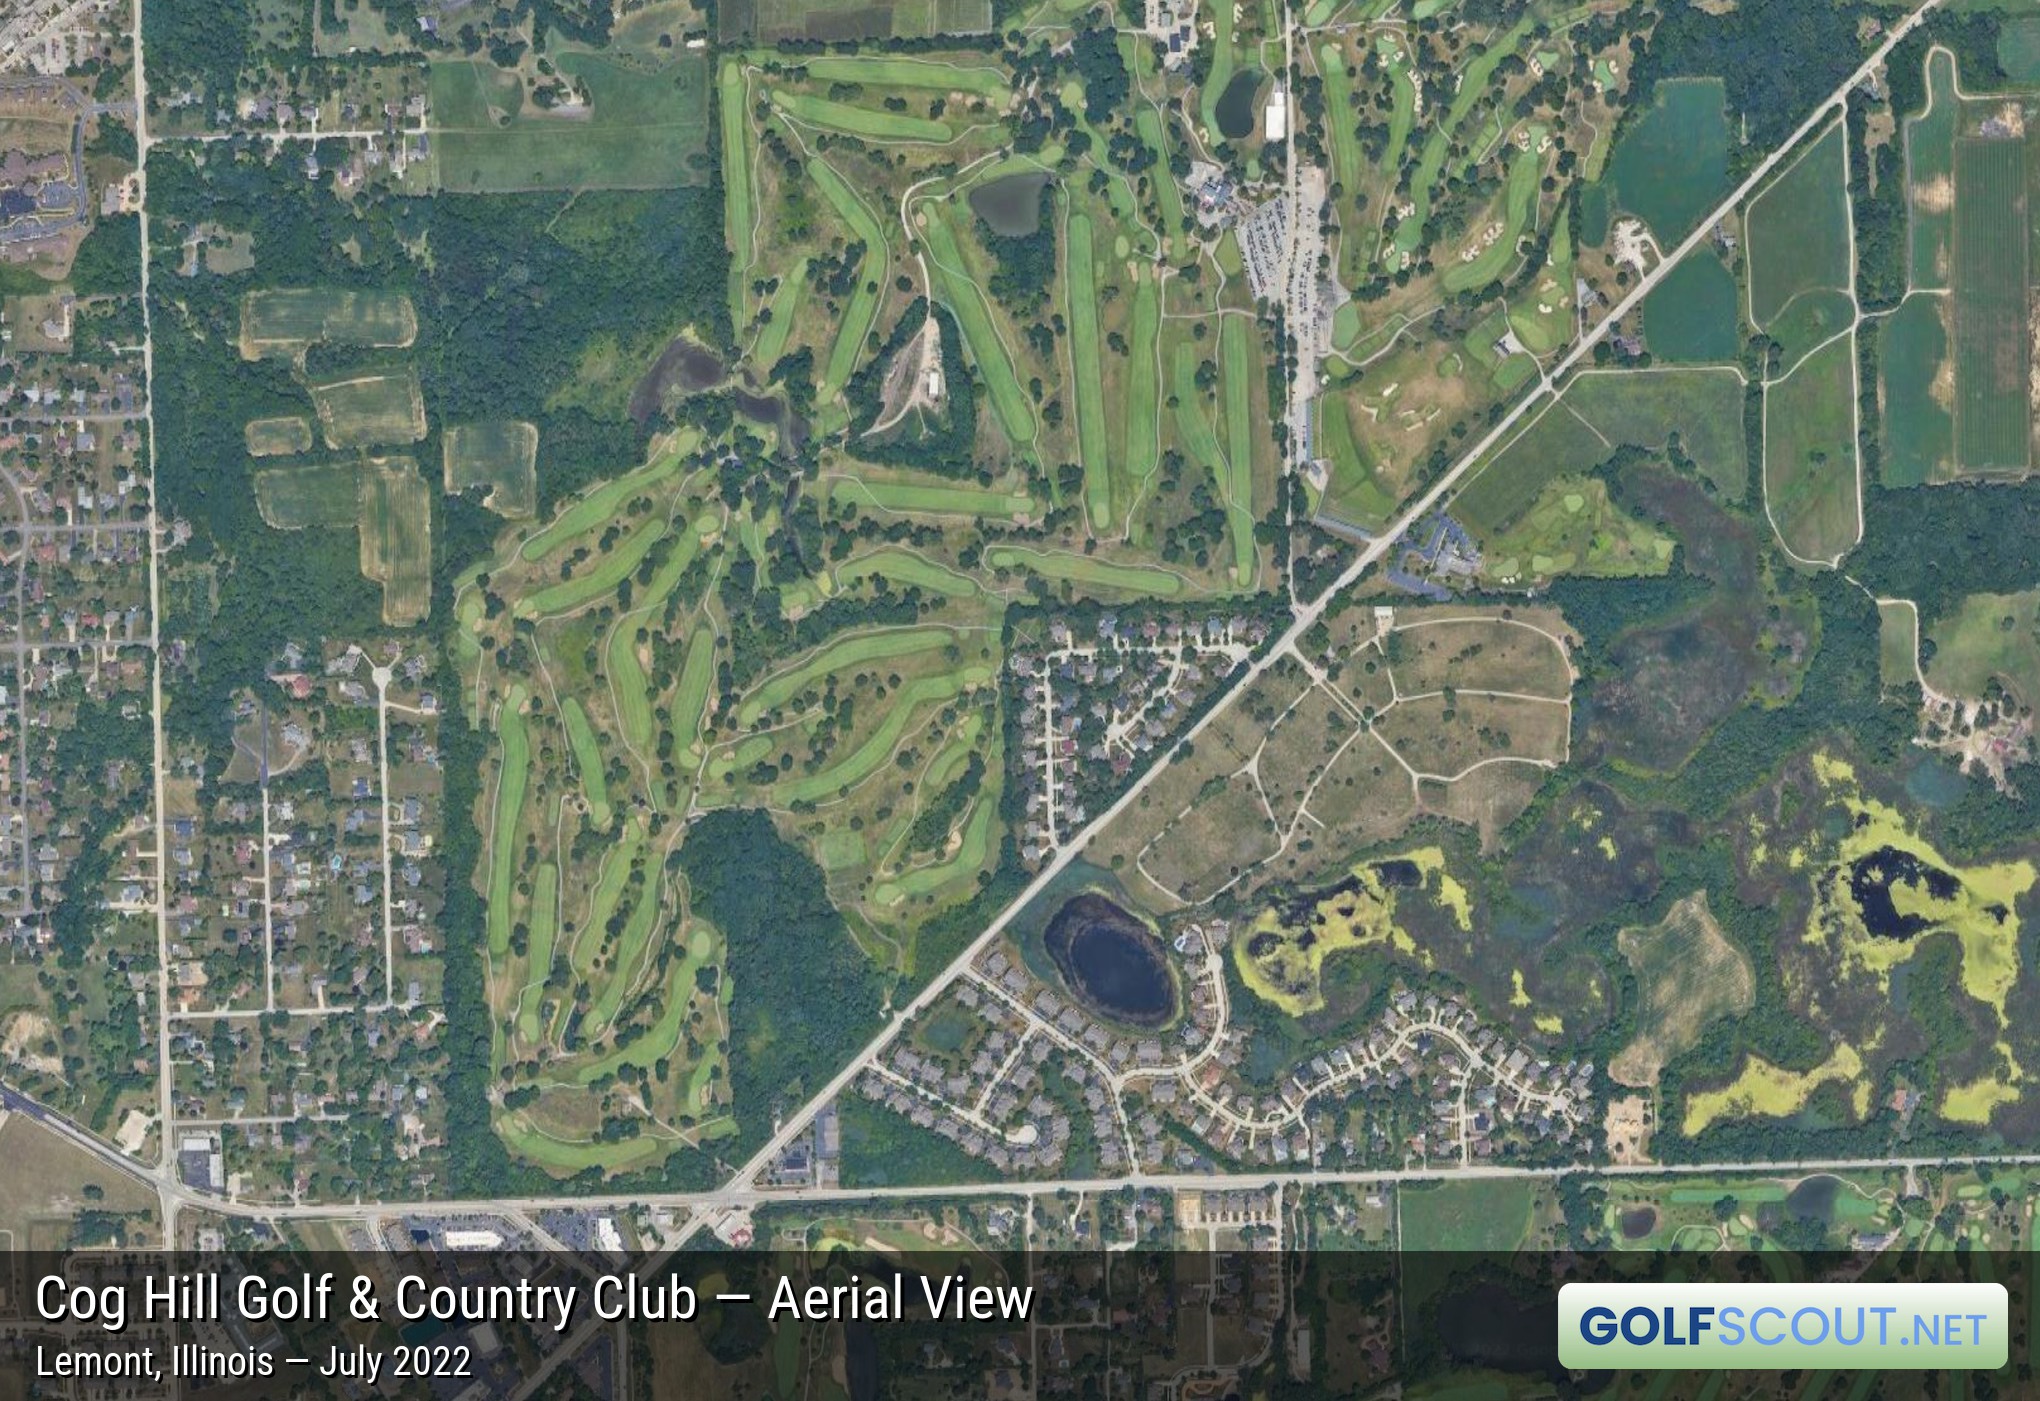 Aerial satellite imagery of Cog Hill Course #1 in Lemont, Illinois. This image is zoomed in on the southwest area of Cog Hill where Courses 1 and 3 are located. Image courtesy of Google Maps.